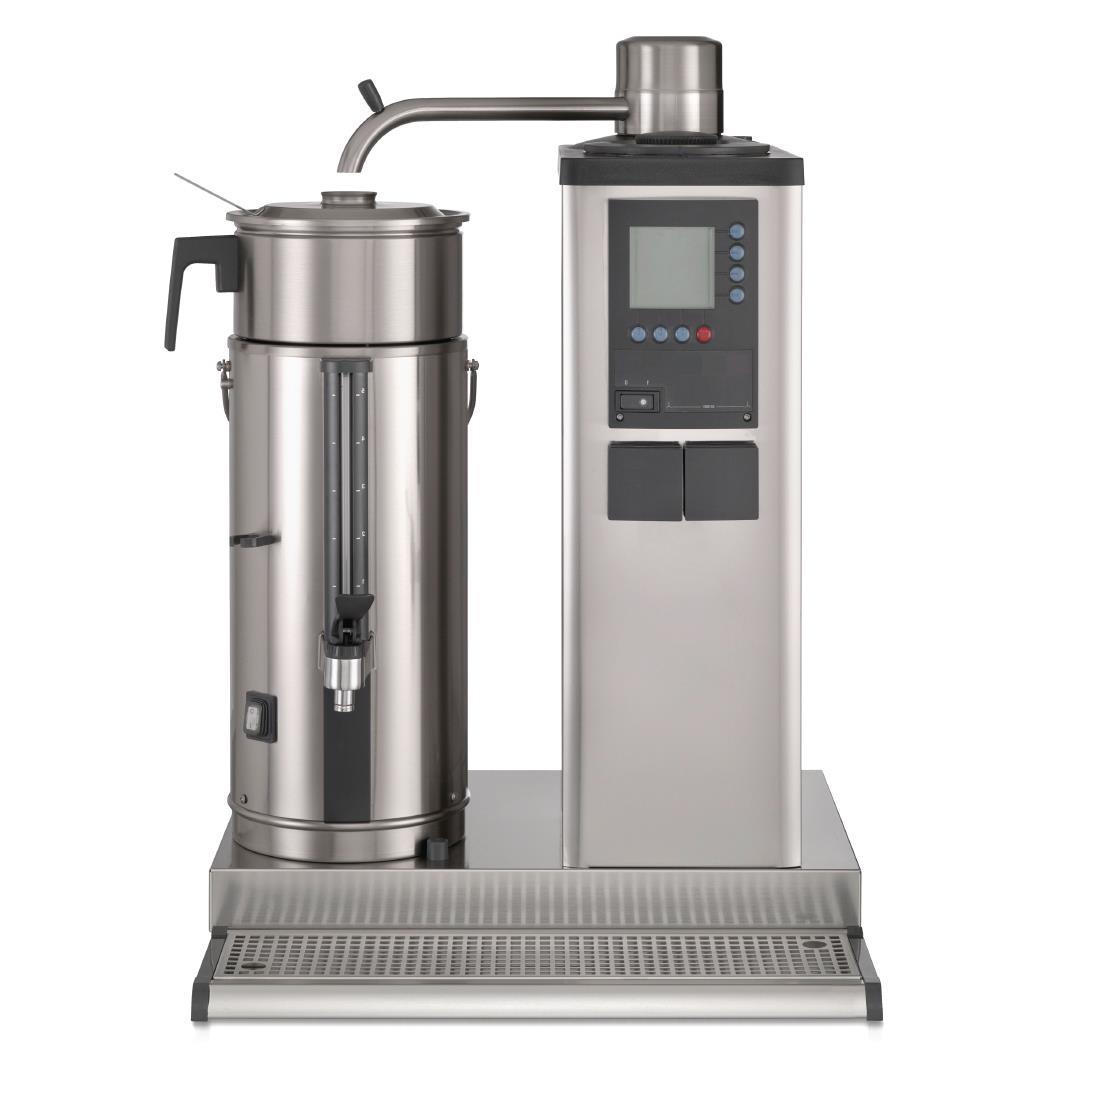 Bravilor B5 L Bulk Coffee Brewer with 5Ltr Coffee Urn Single Phase - DC673-1P  - 2